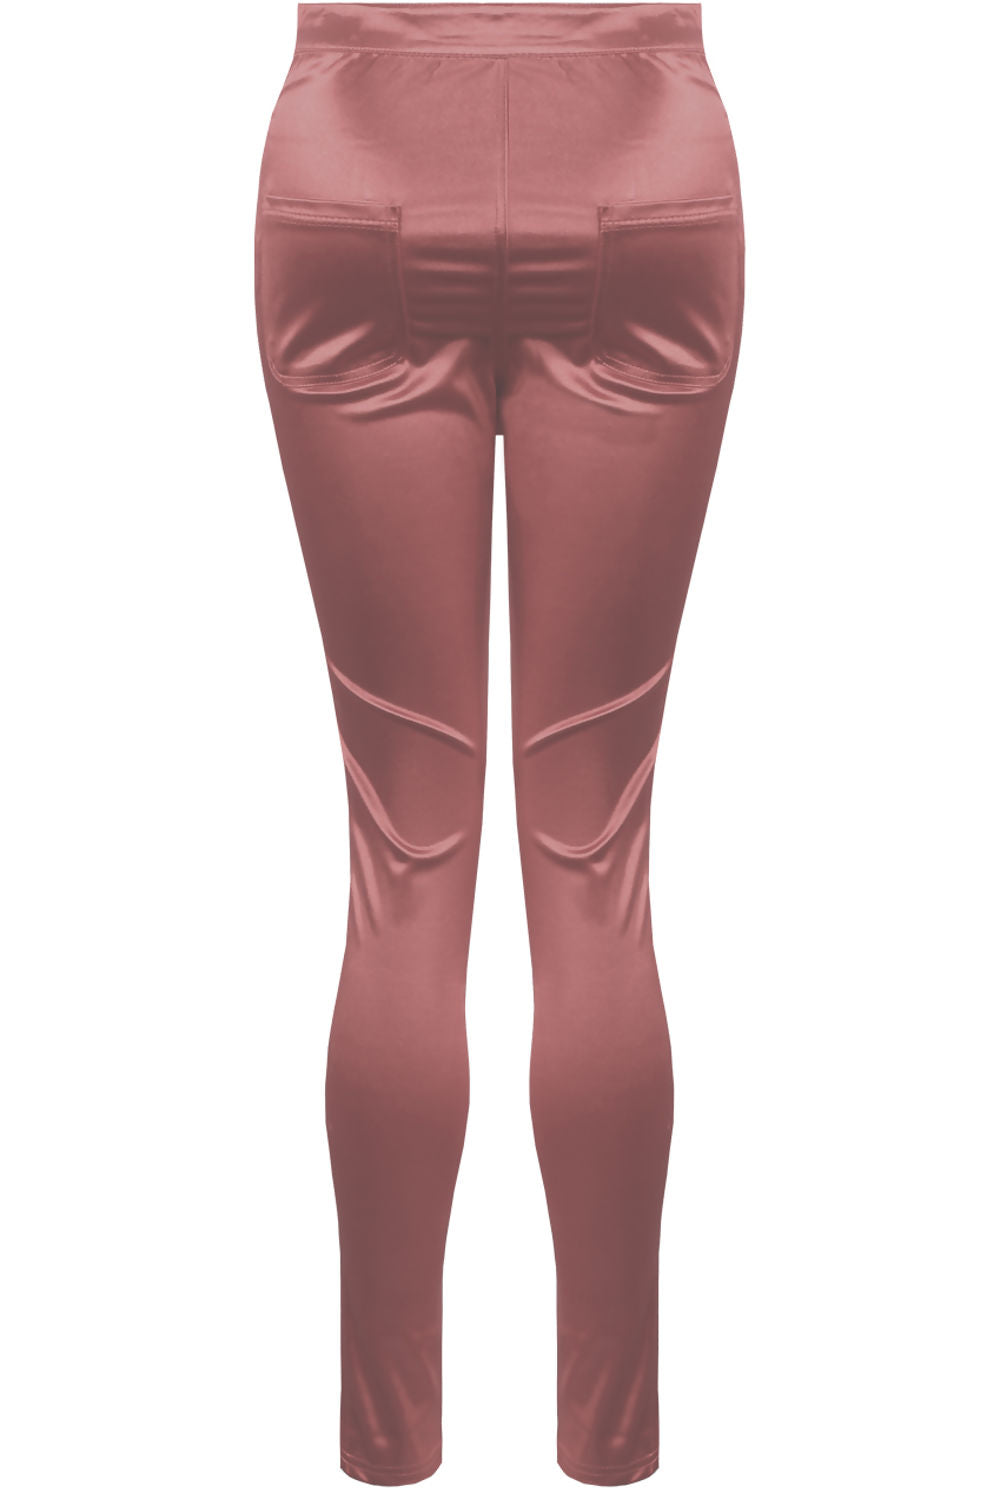 Ghost manequin wears a pink satin skinny fit jeans. The back of the triusers is visible, showing the two back pockets.